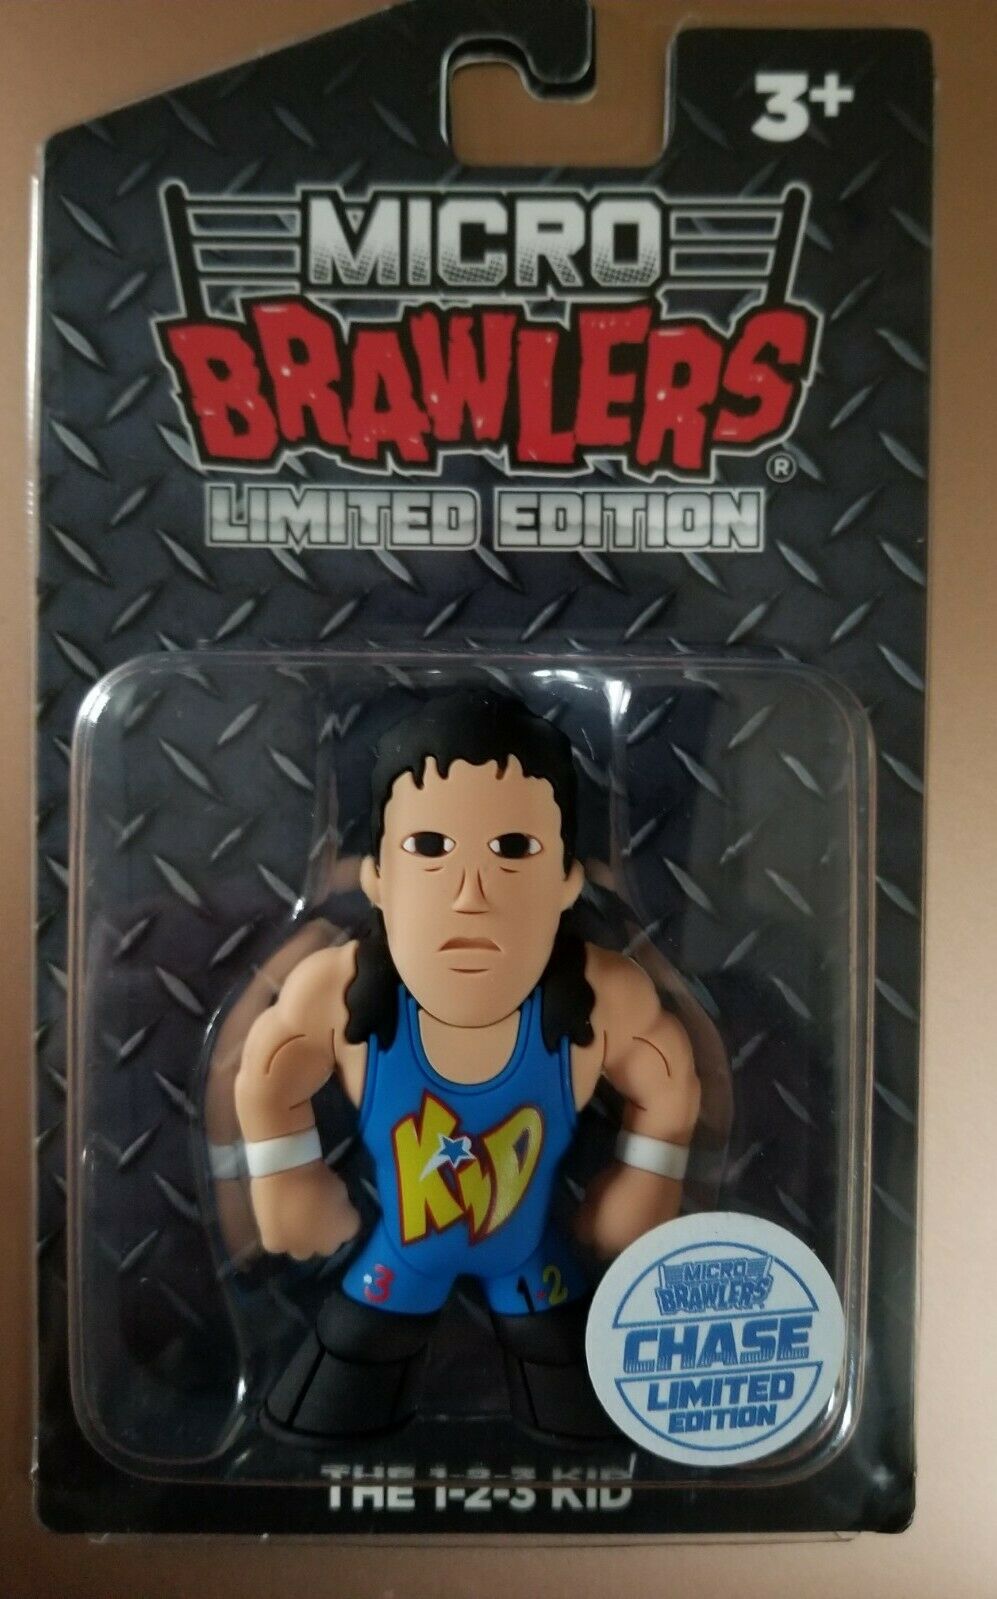 2022 Pro Wrestling Tees Crate Exclusive Micro Brawlers 1-2-3 Kid [April, Chase]